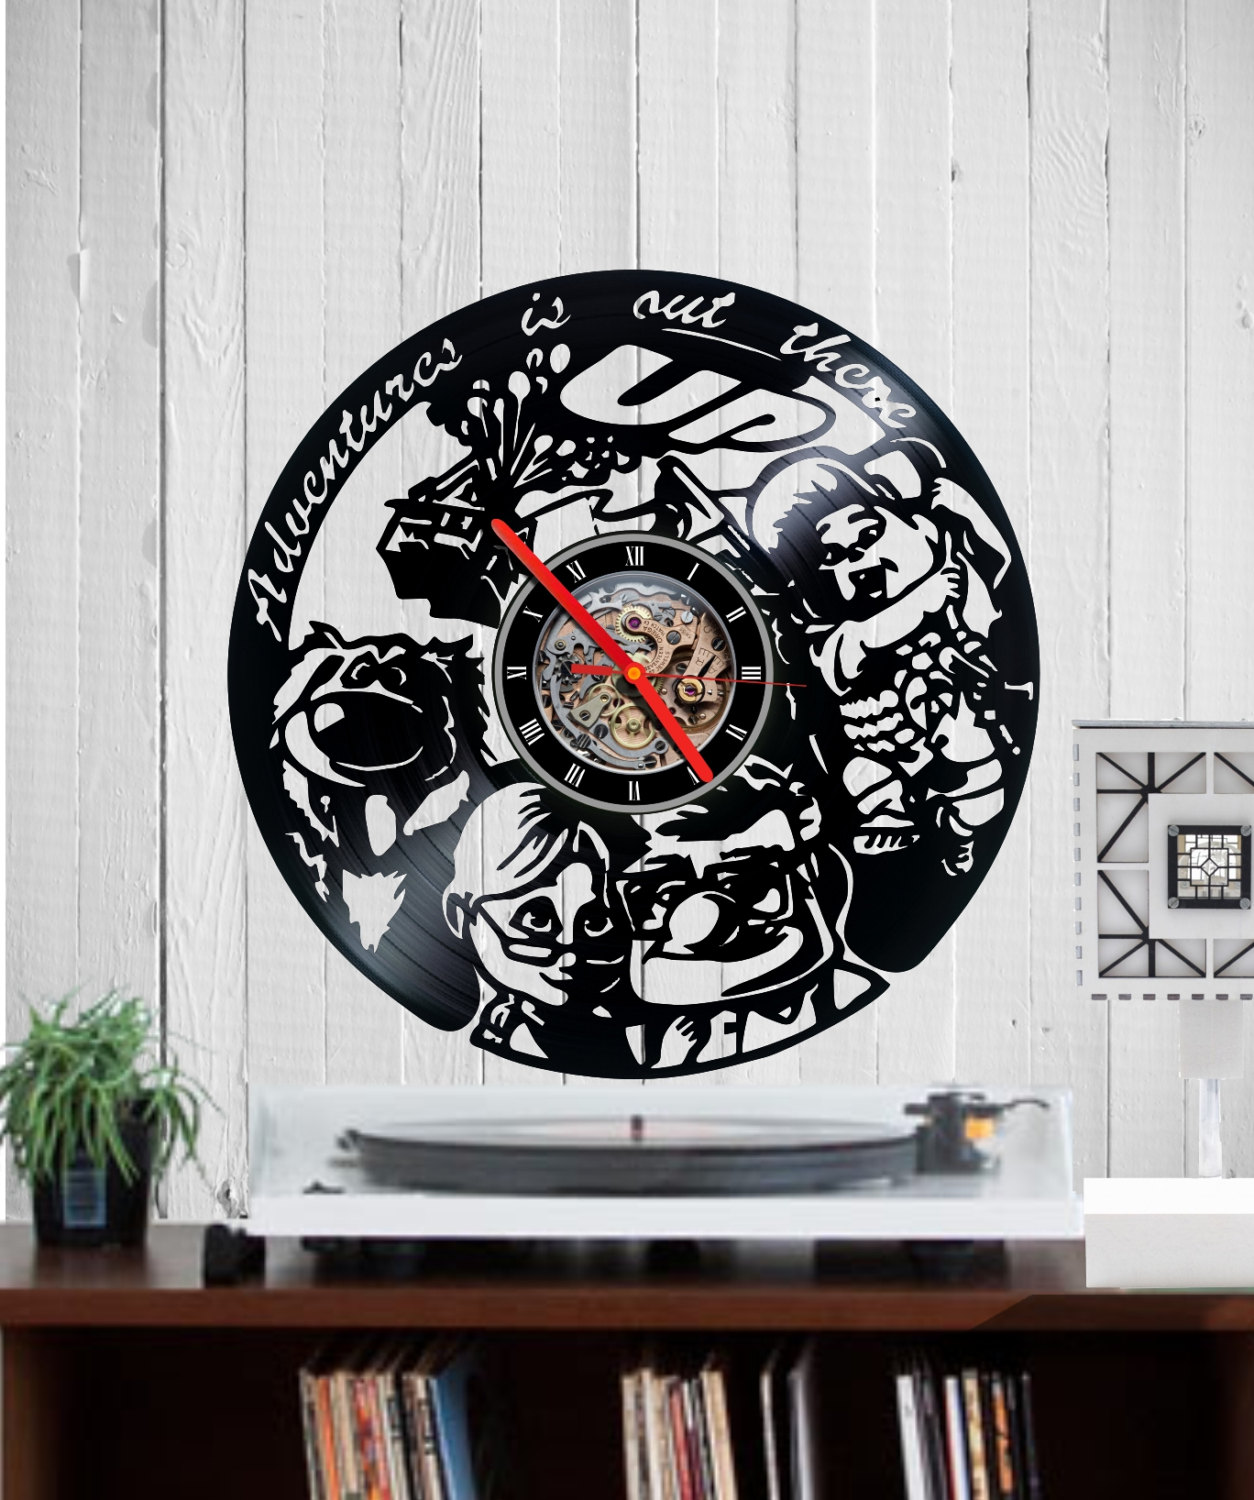 The lord of the Rings Vinyl Record Wall Clock Decor Handmade 2097 